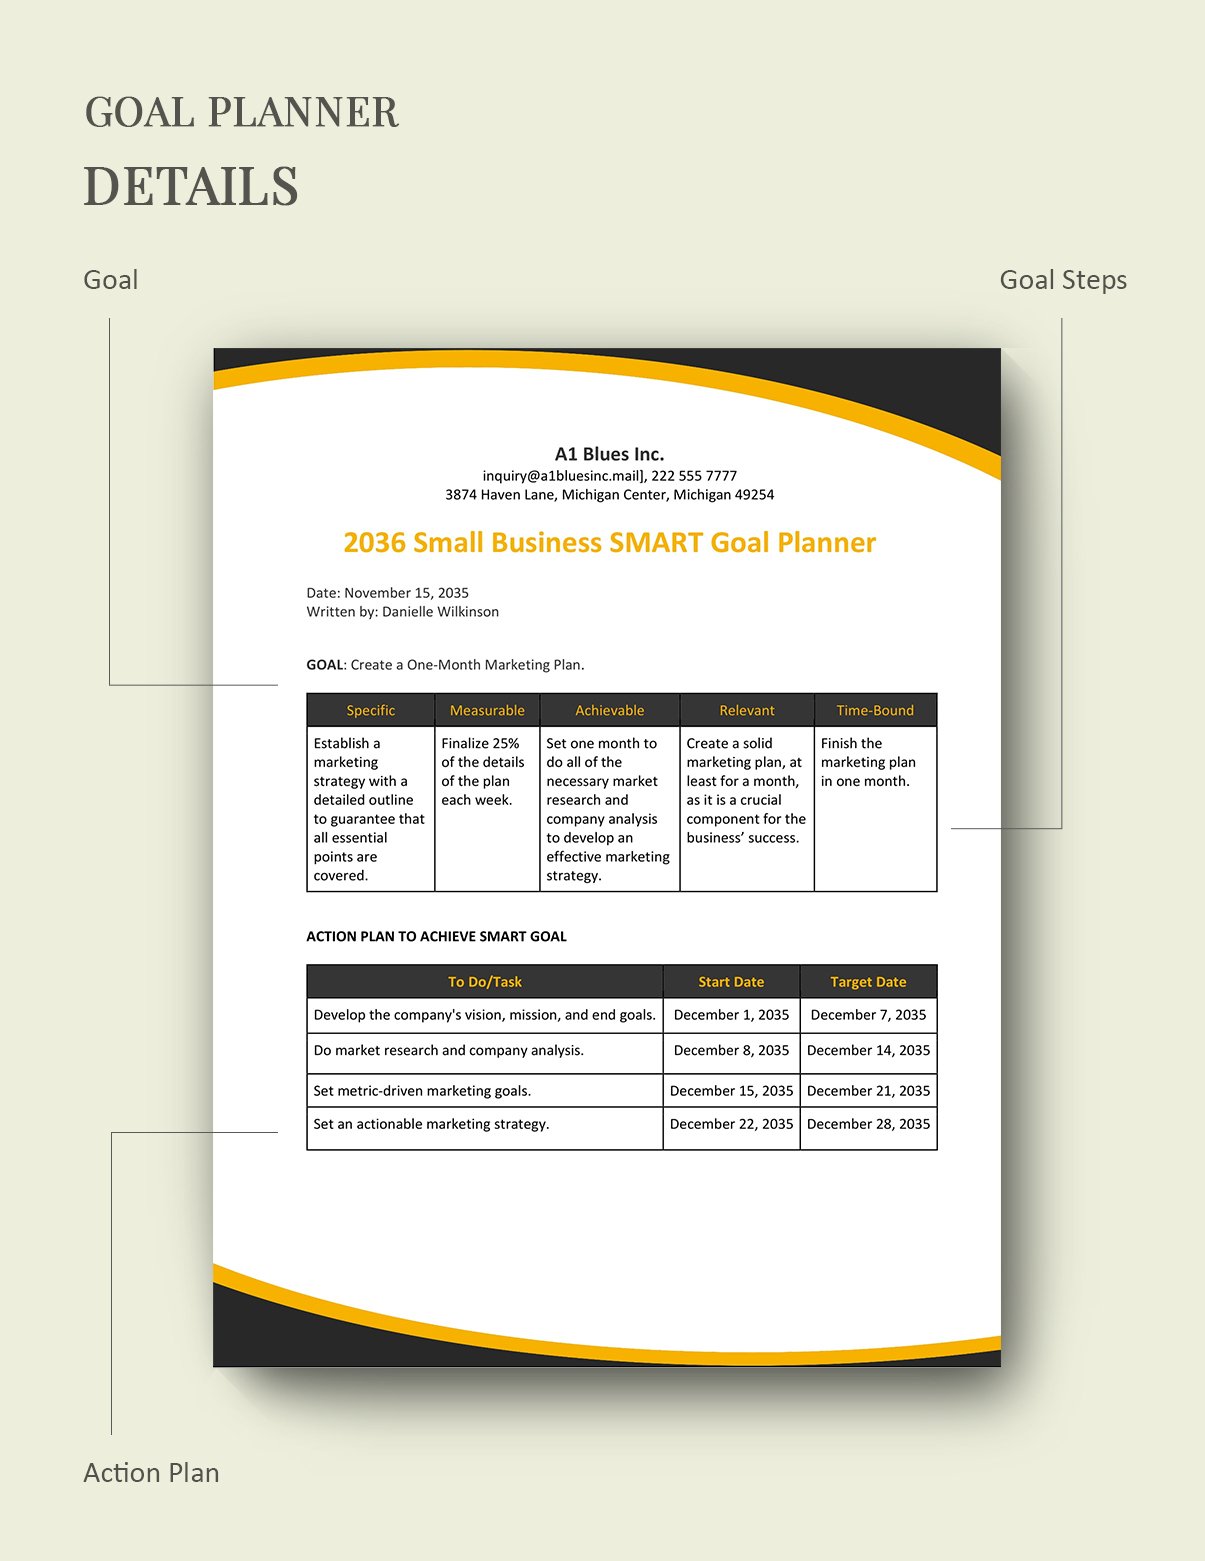 SMART Goal Planner for Small Business Template